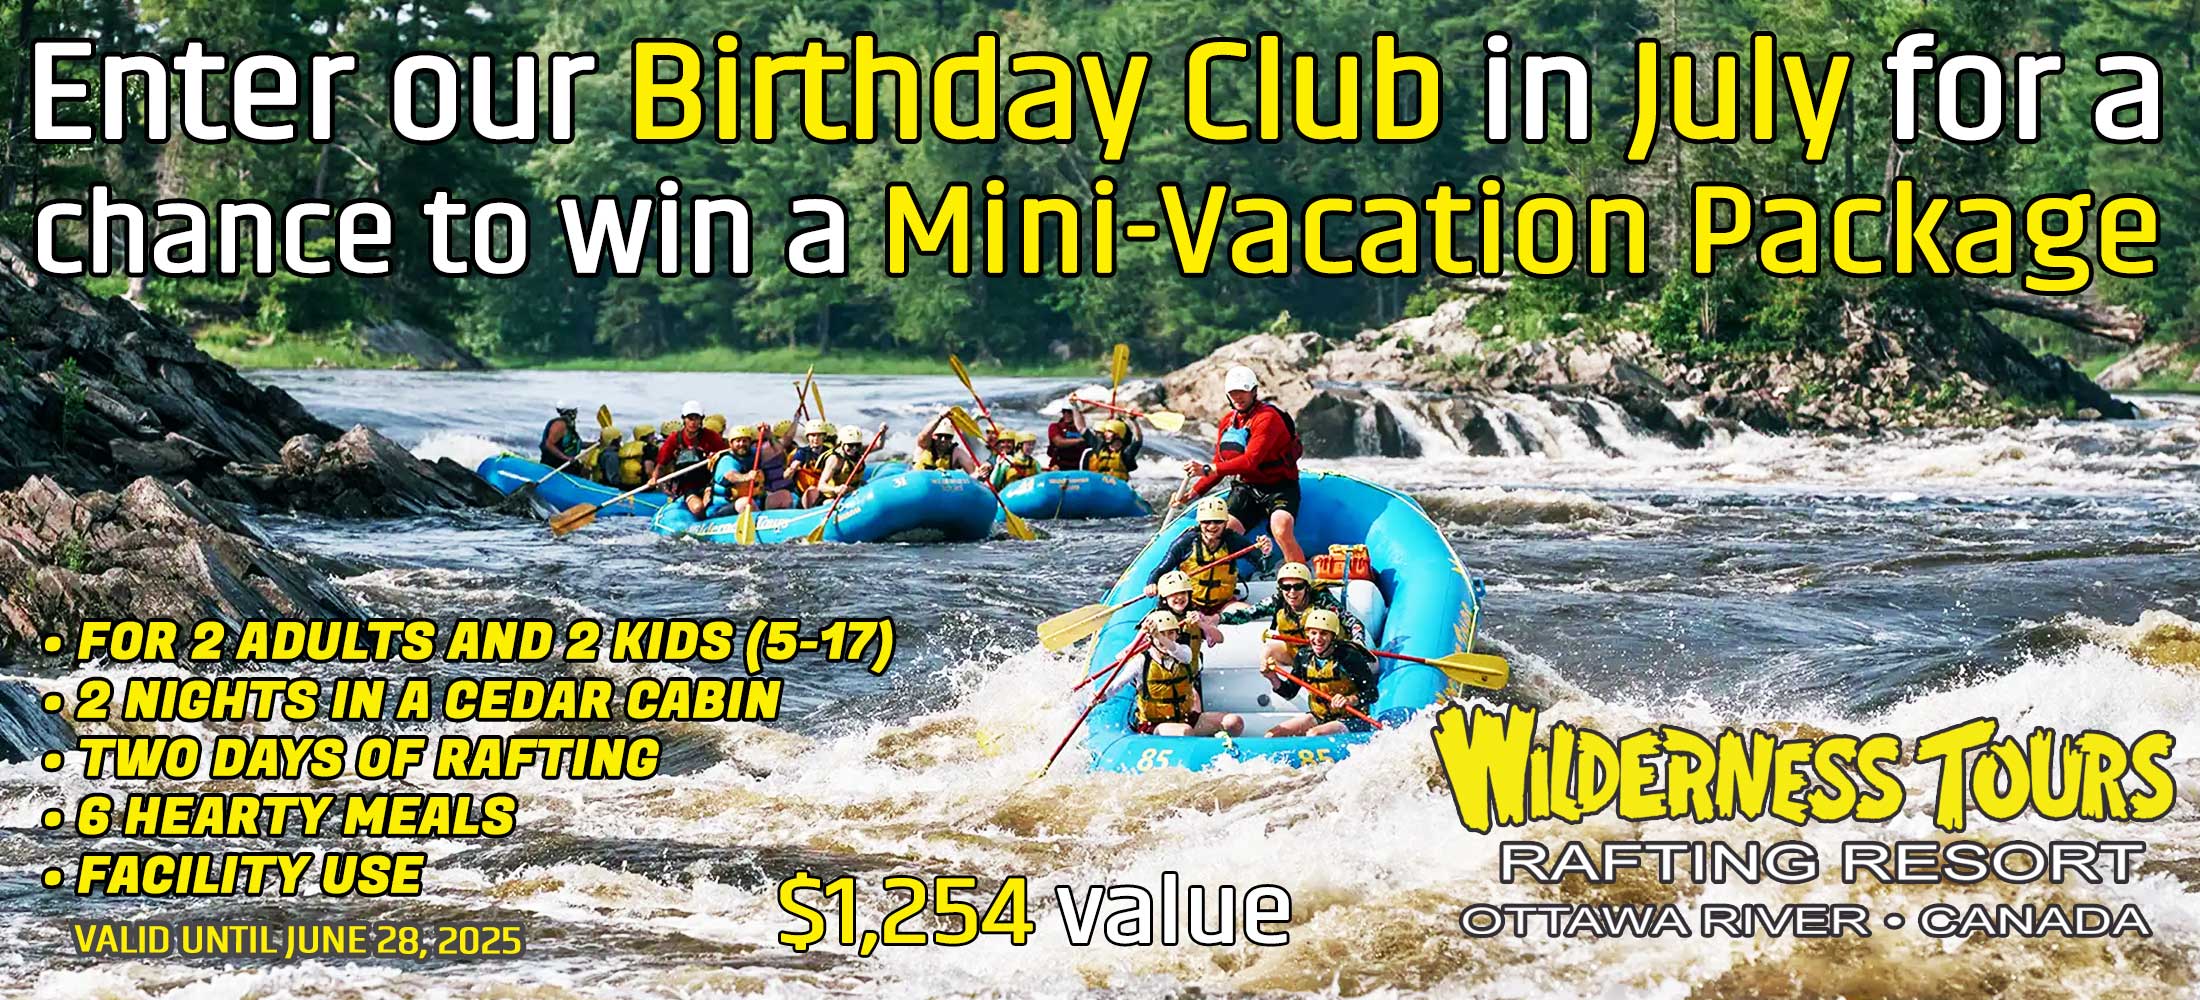 Enter our Birthday Club in July for a chance to win a Mini-Vacation Package from Wilderness Tours Rafting Resort